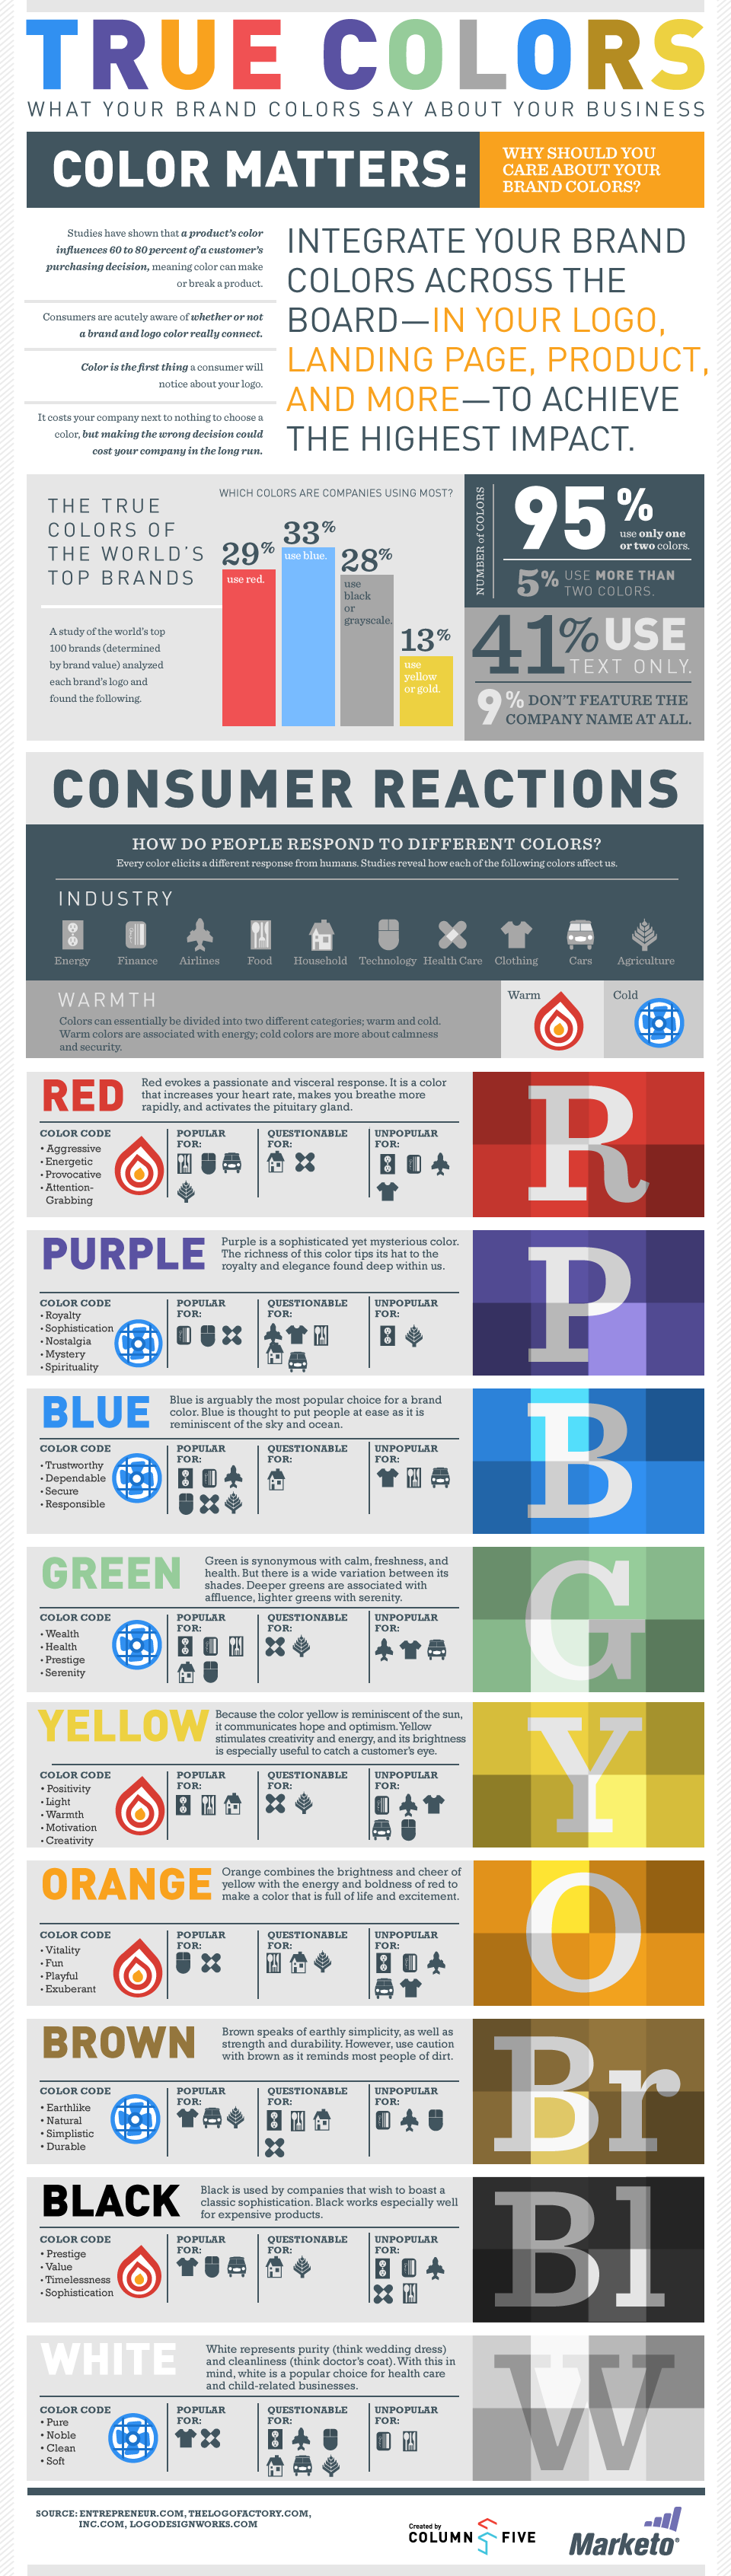 True Colors - what your brand colors say about your business